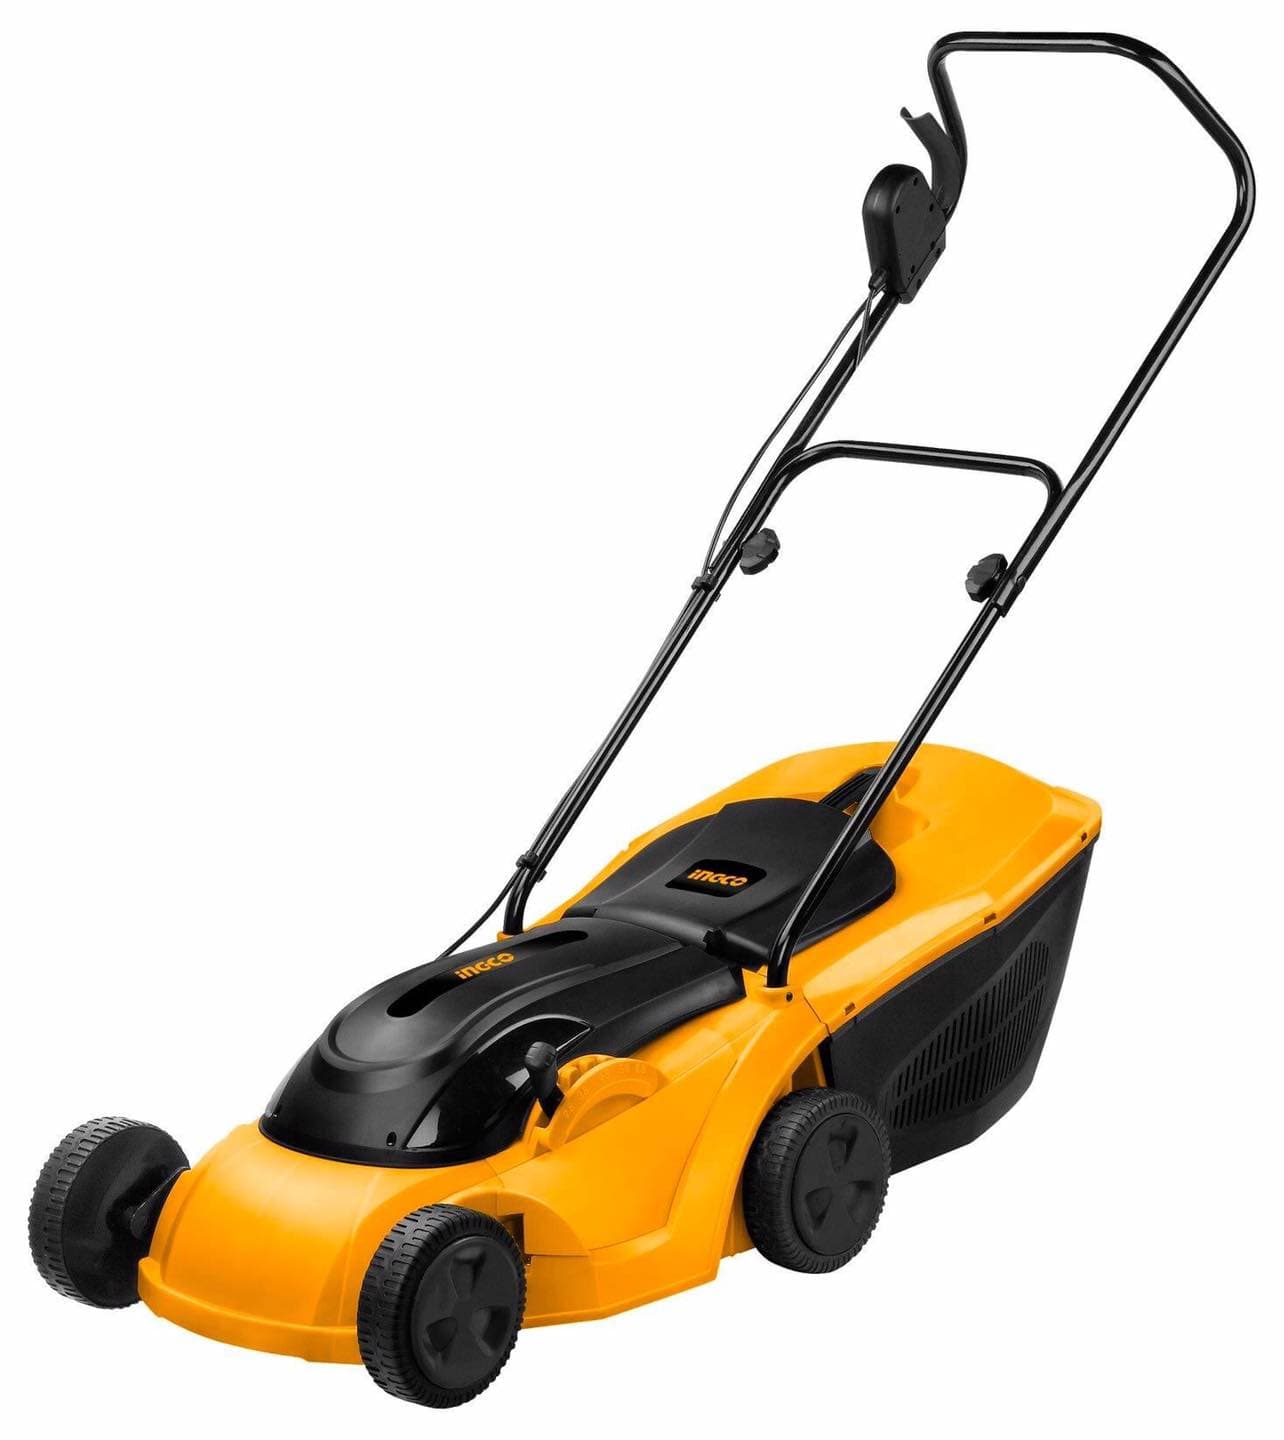 Ingco Industrial Electric Lawn Mower 1600W - LM383 | Supply Master | Accra, Ghana Tools Building Steel Engineering Hardware tool